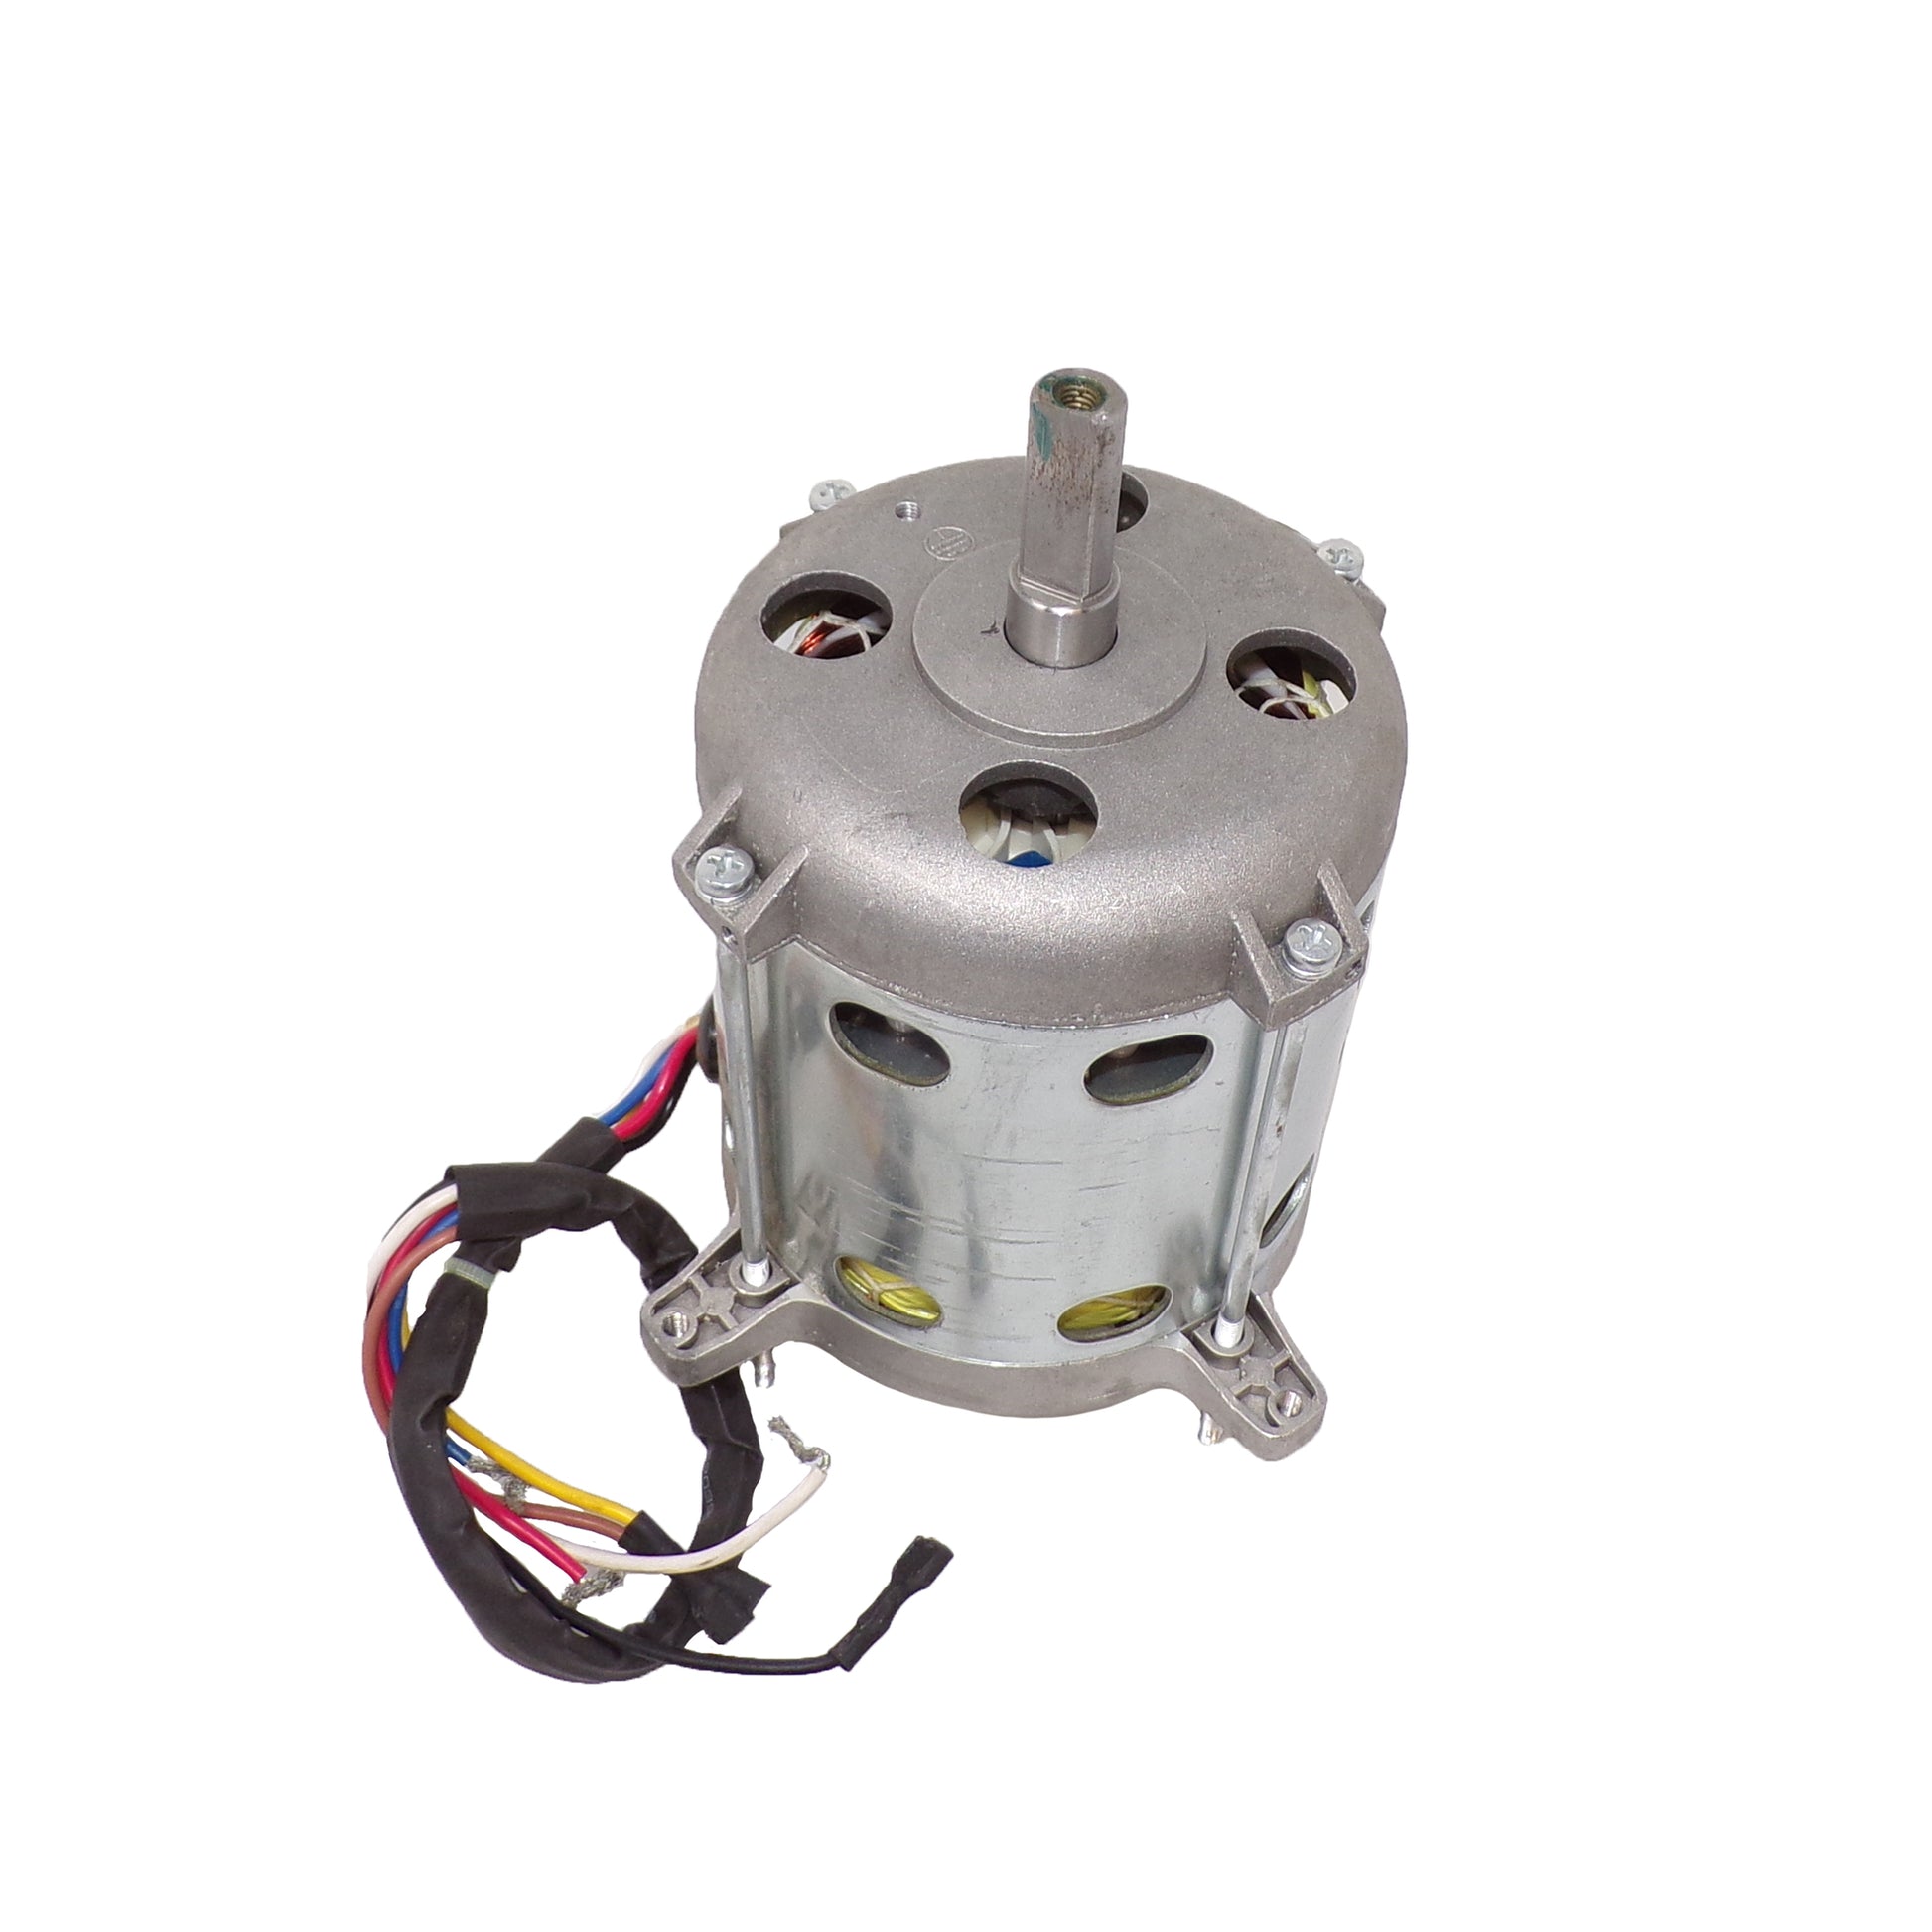 Motor for P/X-630 Air Mover